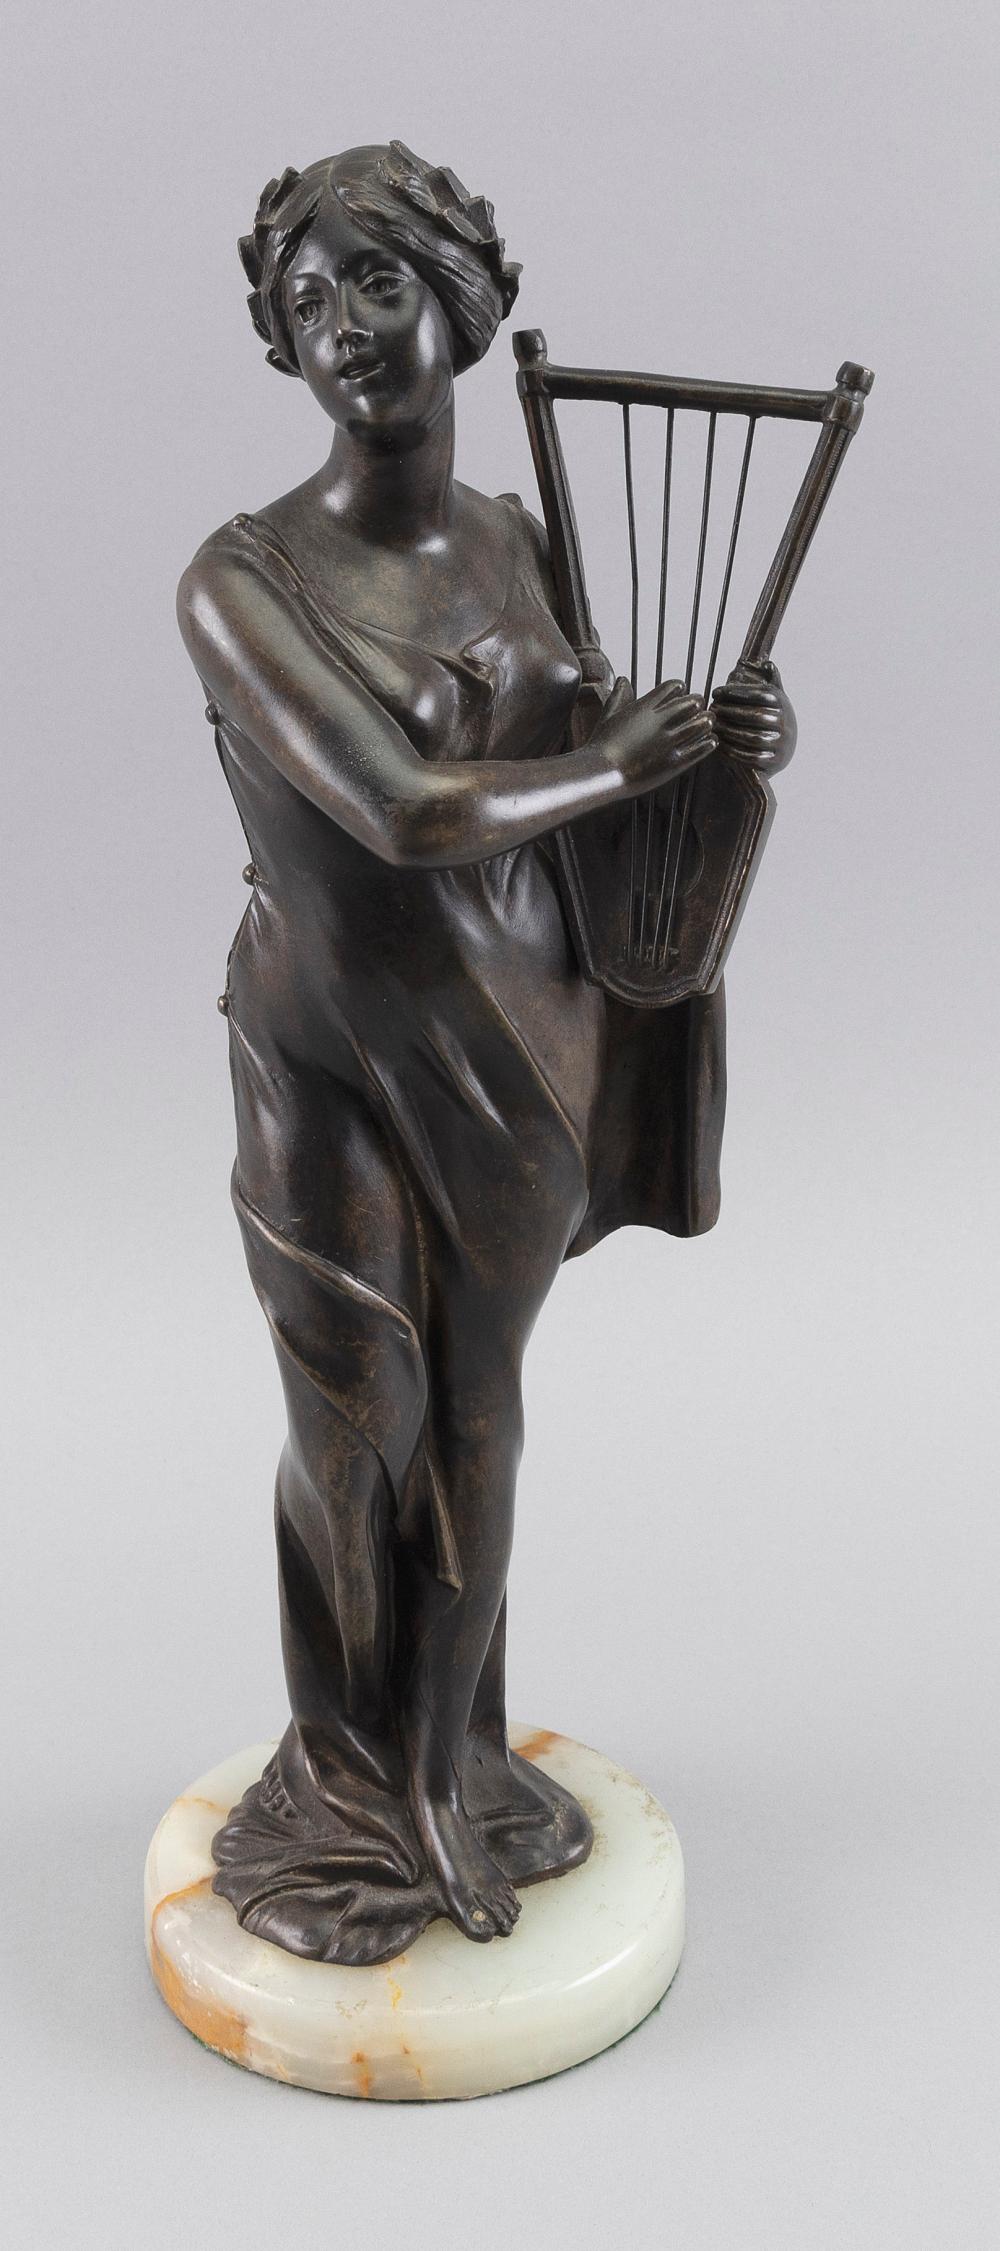 BRONZE FIGURE OF A WOMAN WITH A 350961